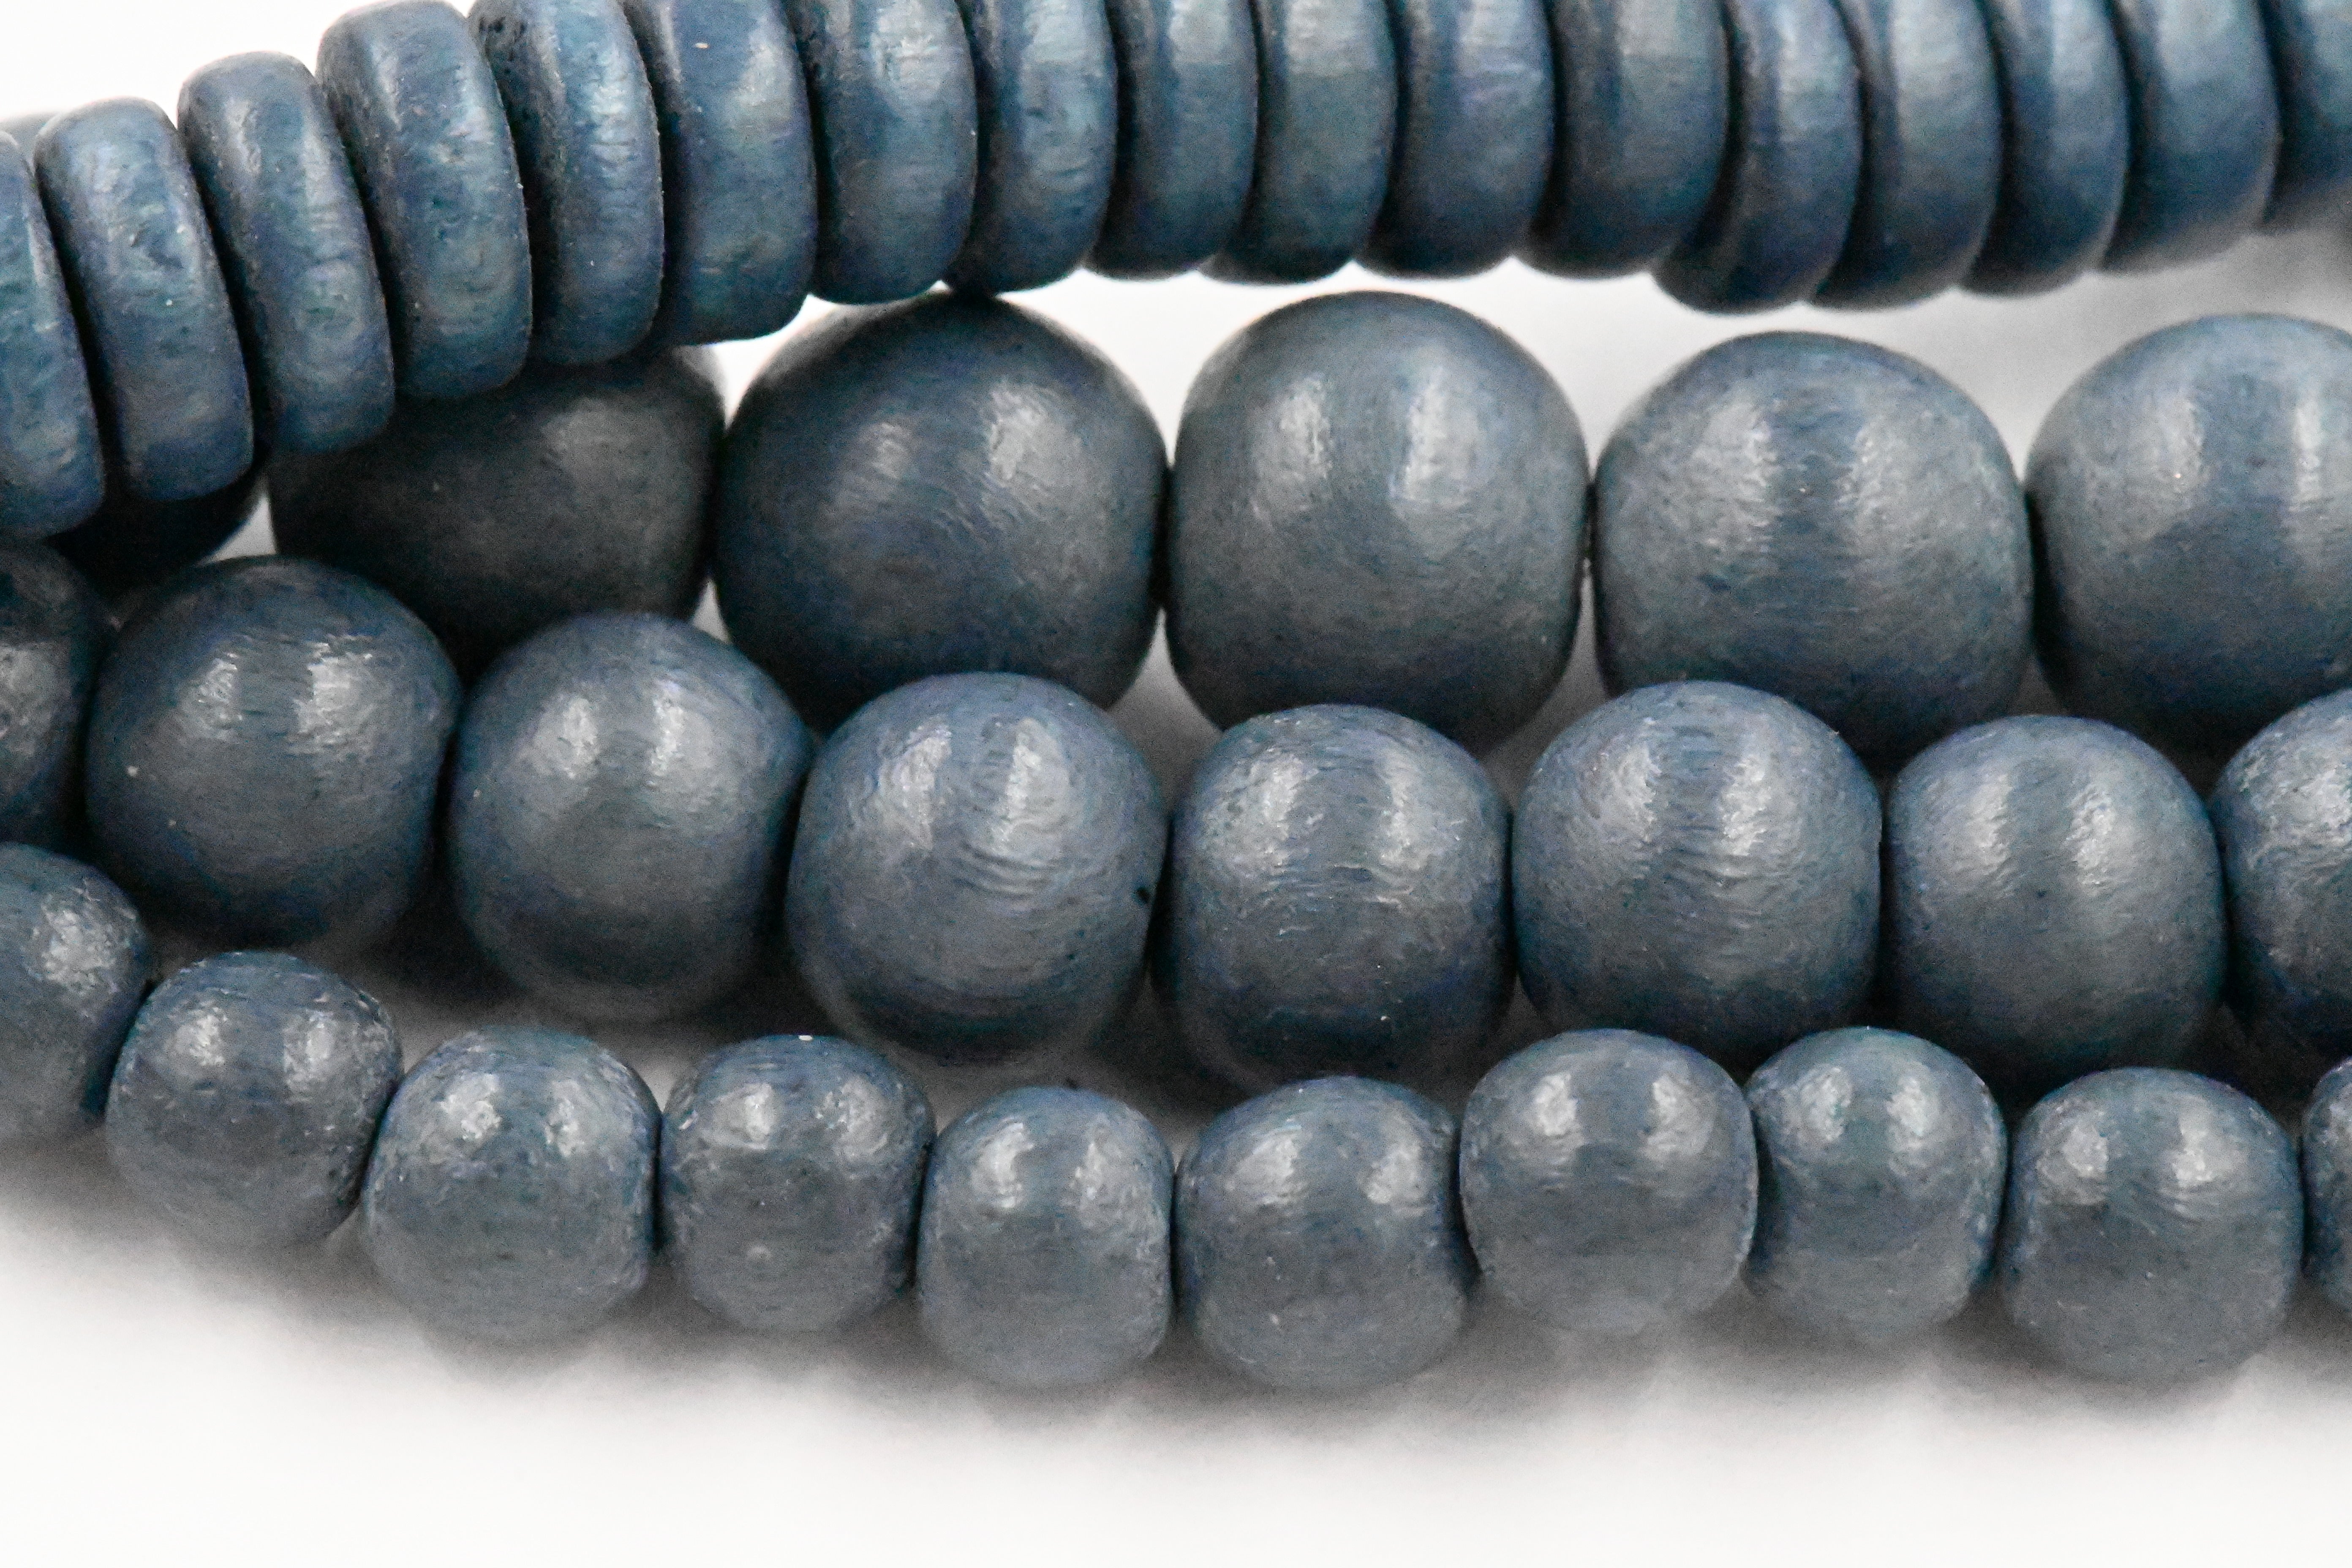 Blue Charcoal Gray Wood Beads 6mm, 8mm, 10mm,12mm, 8x5mm -16 inch Strand